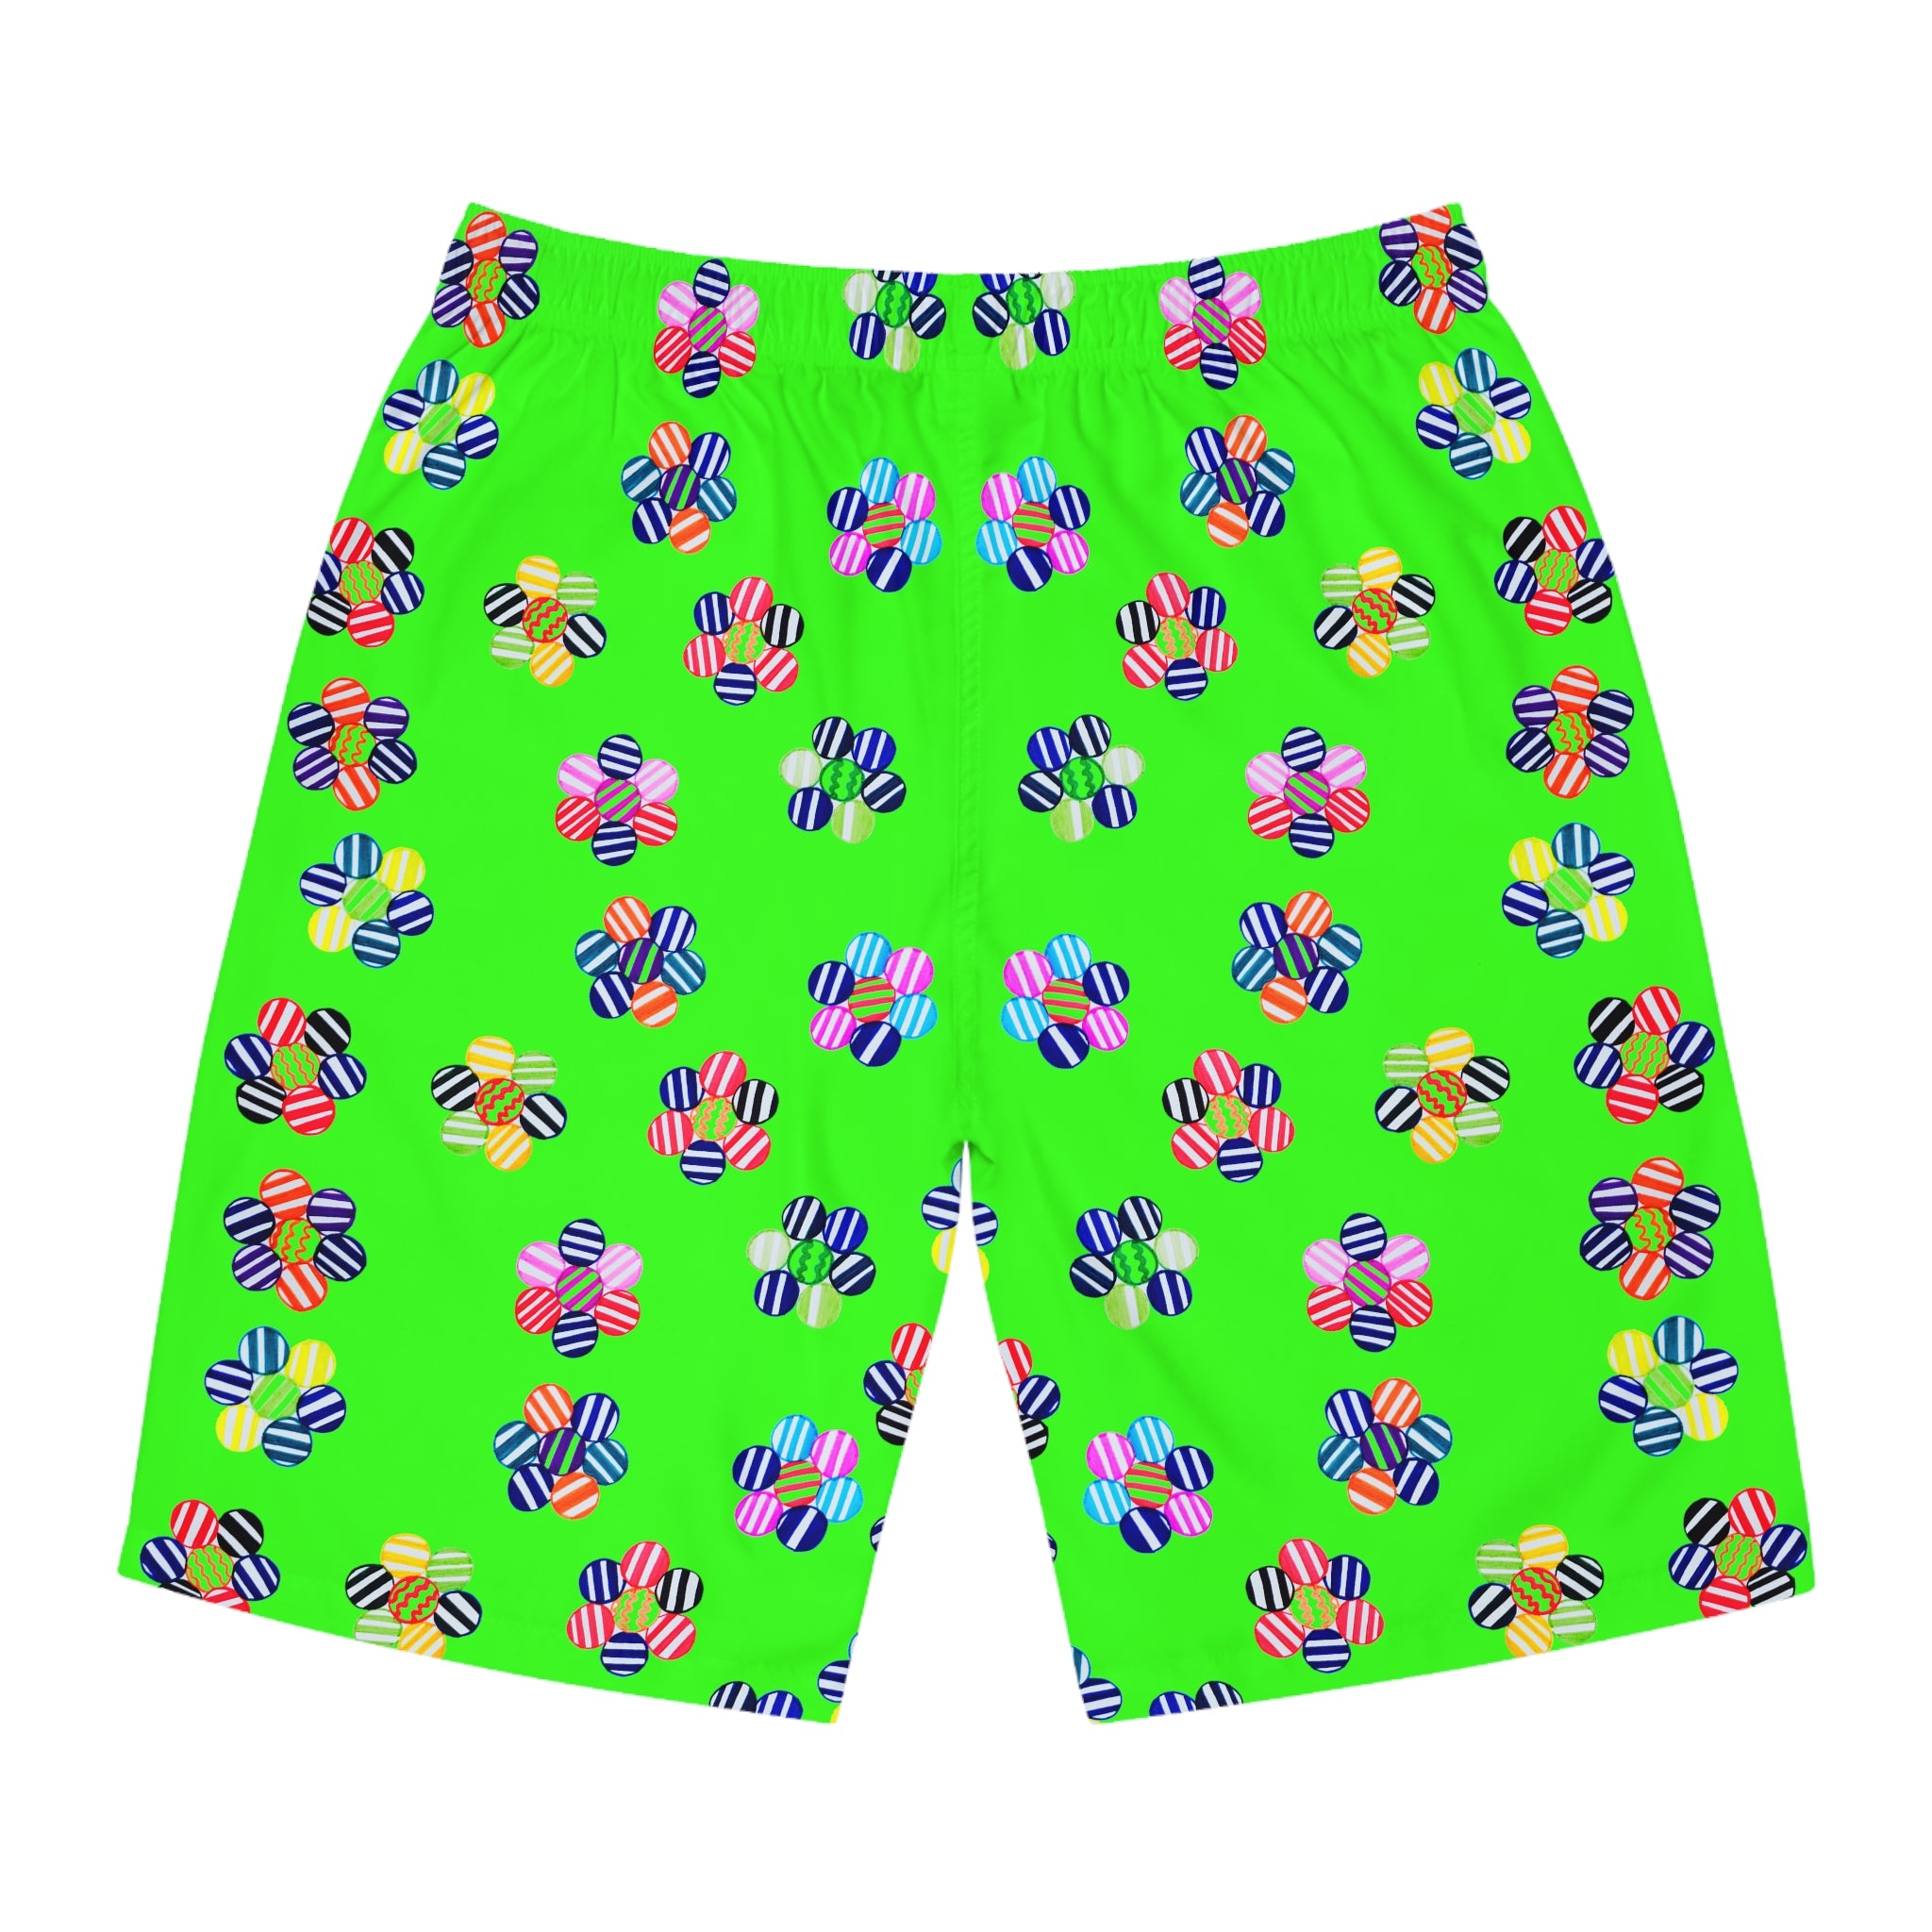 Neon Green Geo Candy Floral Men's Board Shorts (AOP)